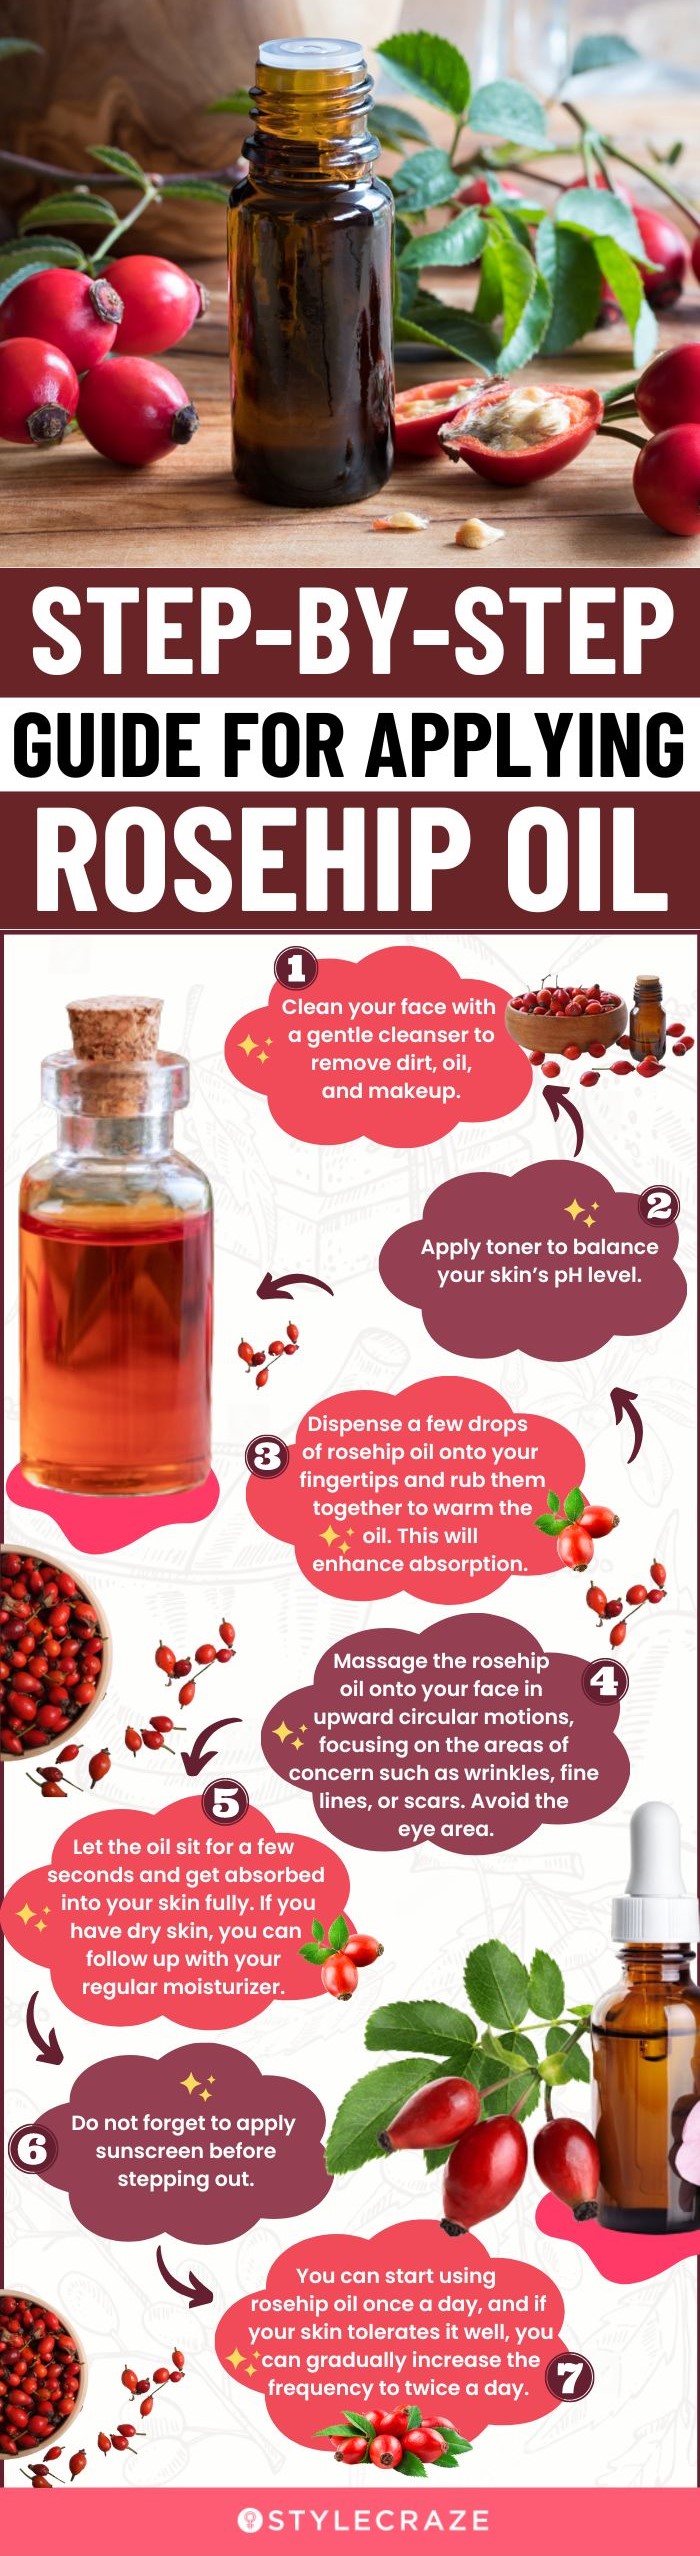 Step-By-Step Guide For Applying Rosehip Oil (infographic)